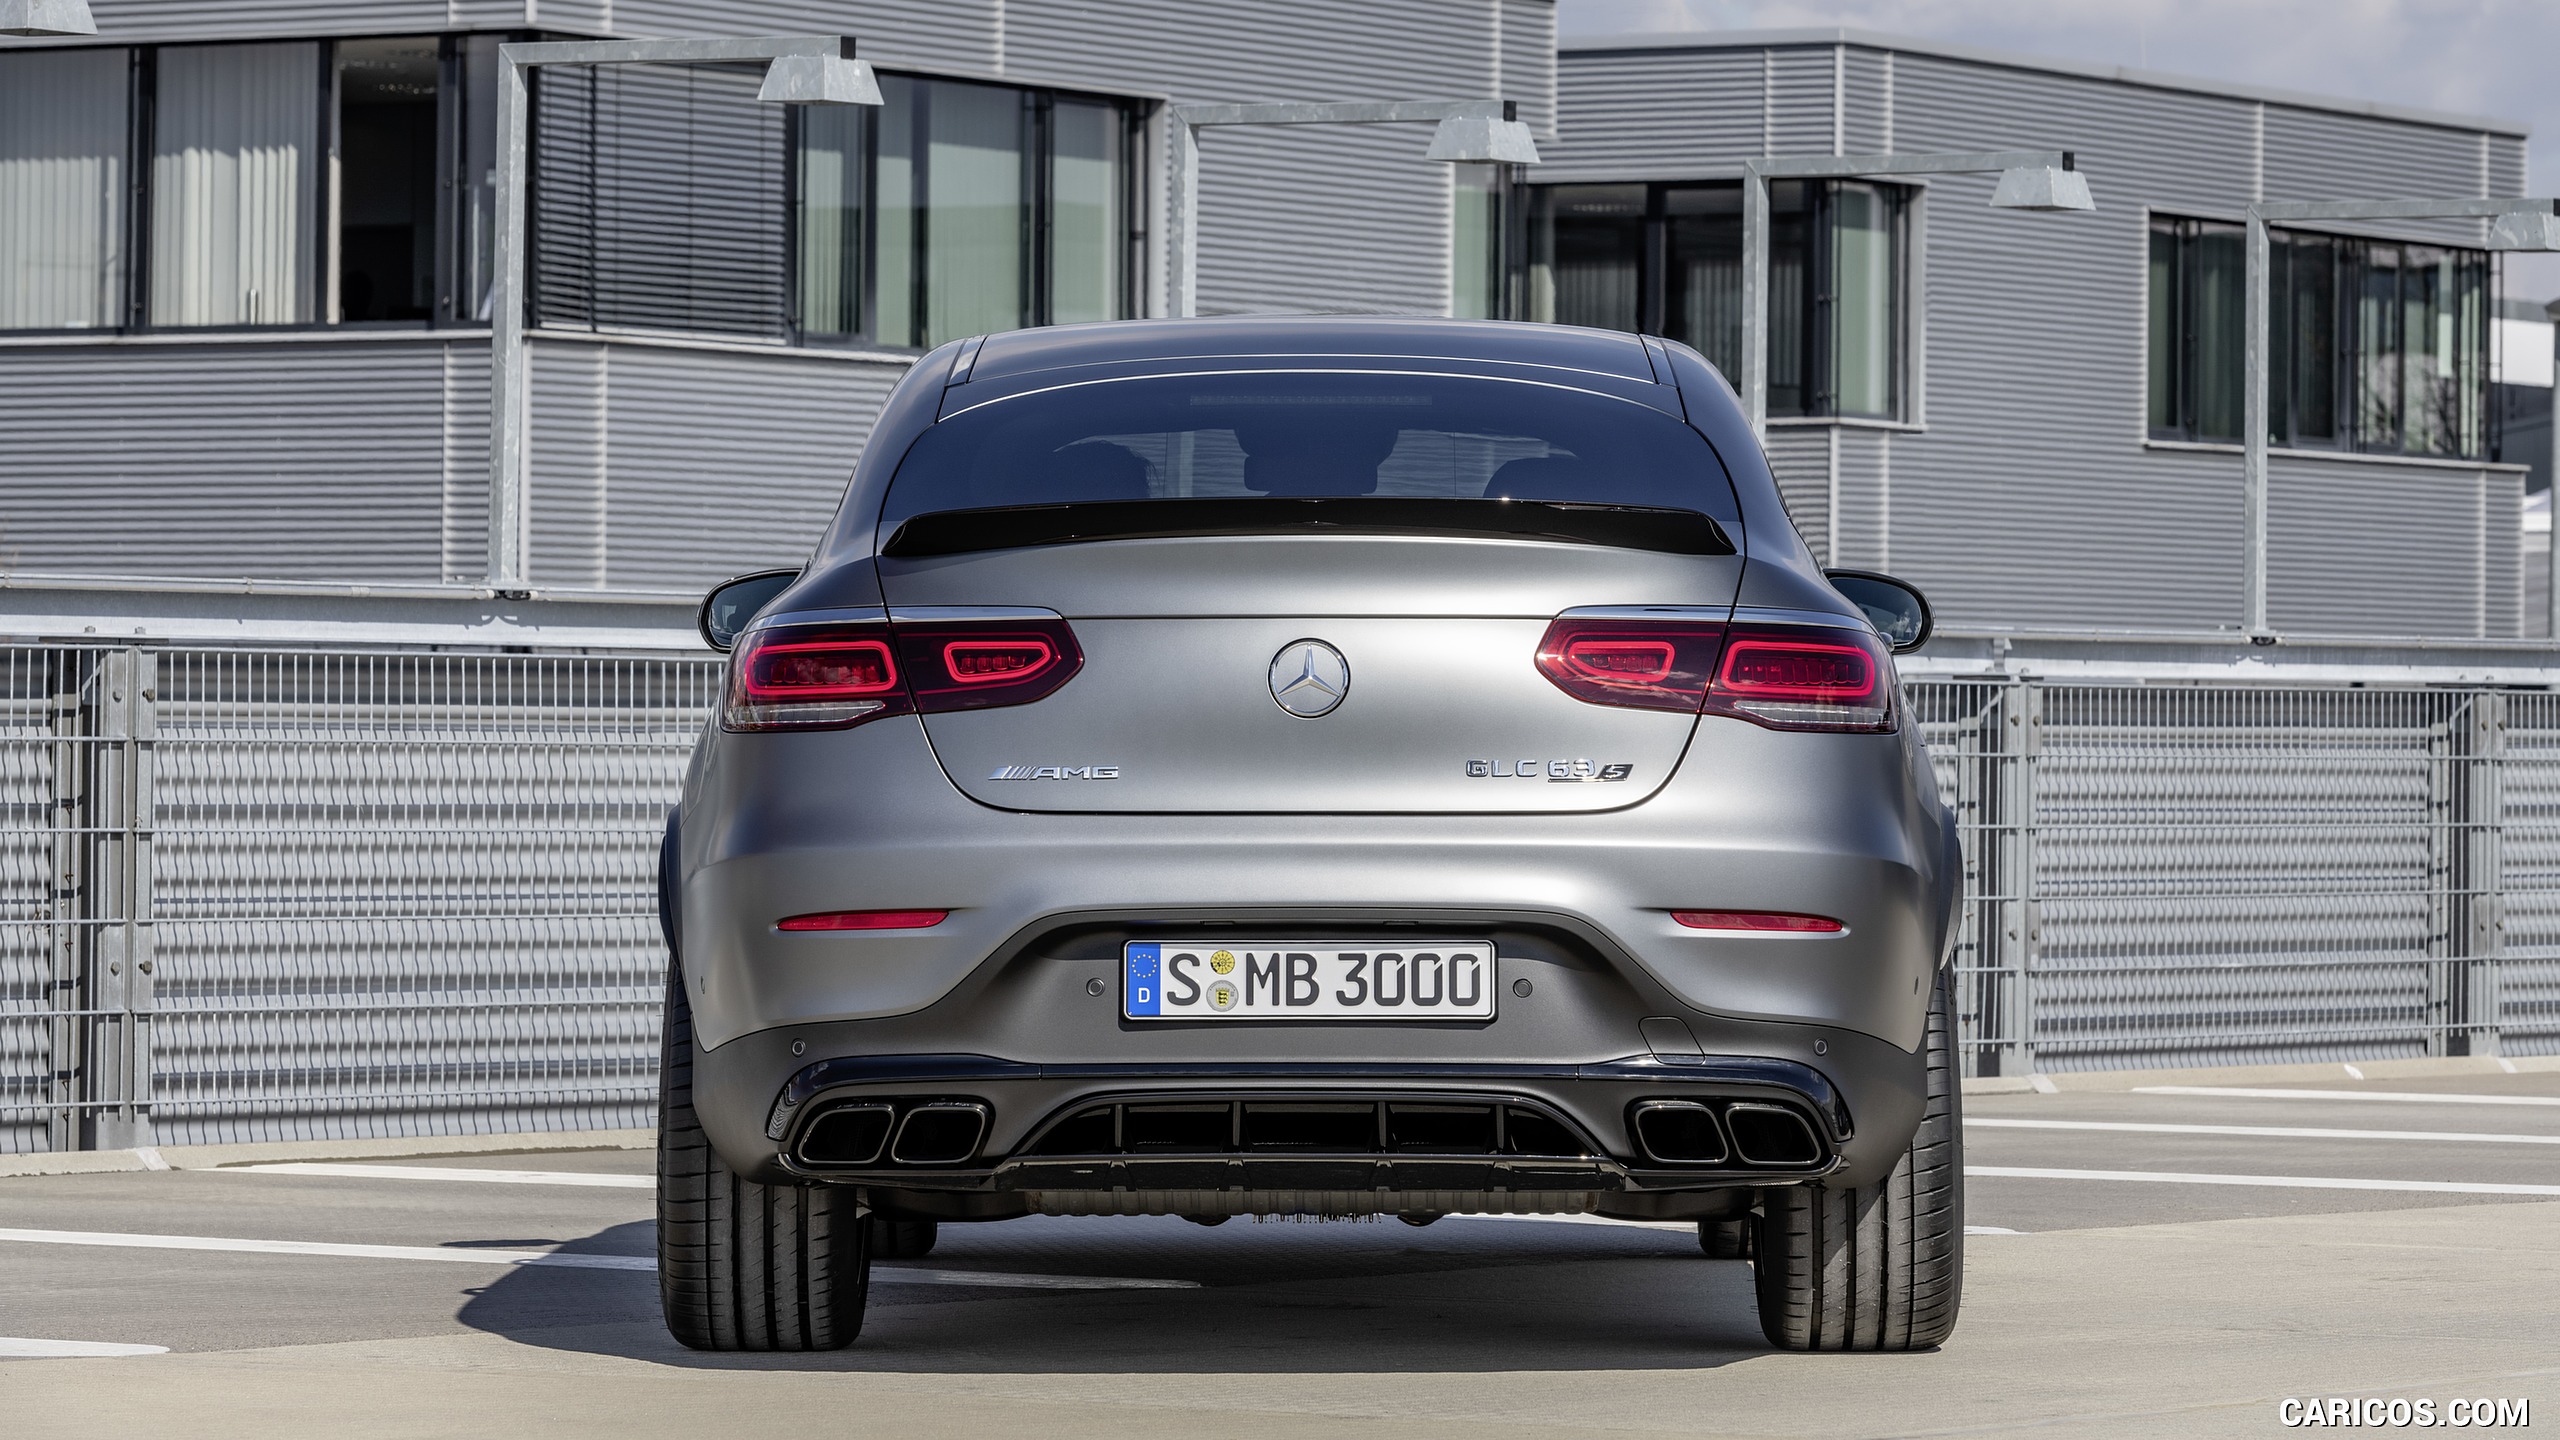 2020 Mercedes-AMG GLC 63 S 4MATIC+ Coupe - Rear, #10 of 102